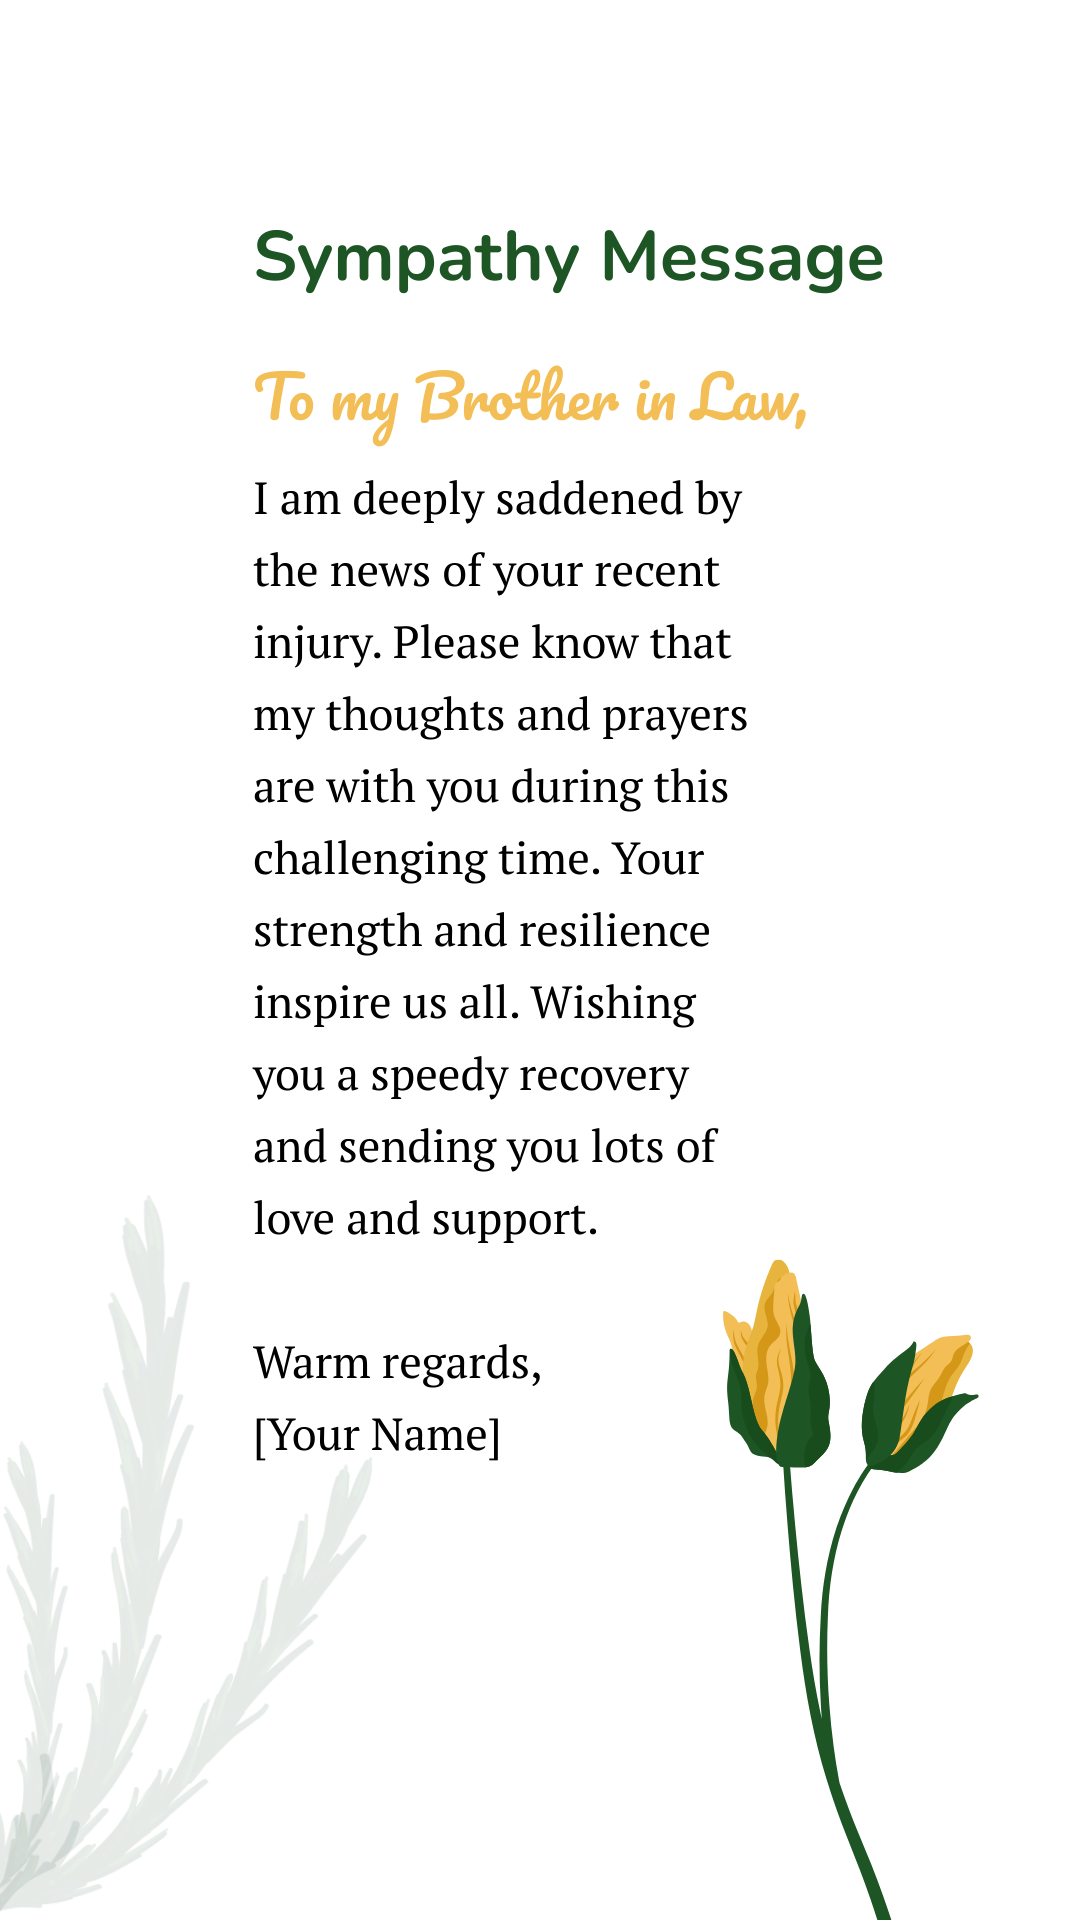 Free sympathy message for brother in law Template